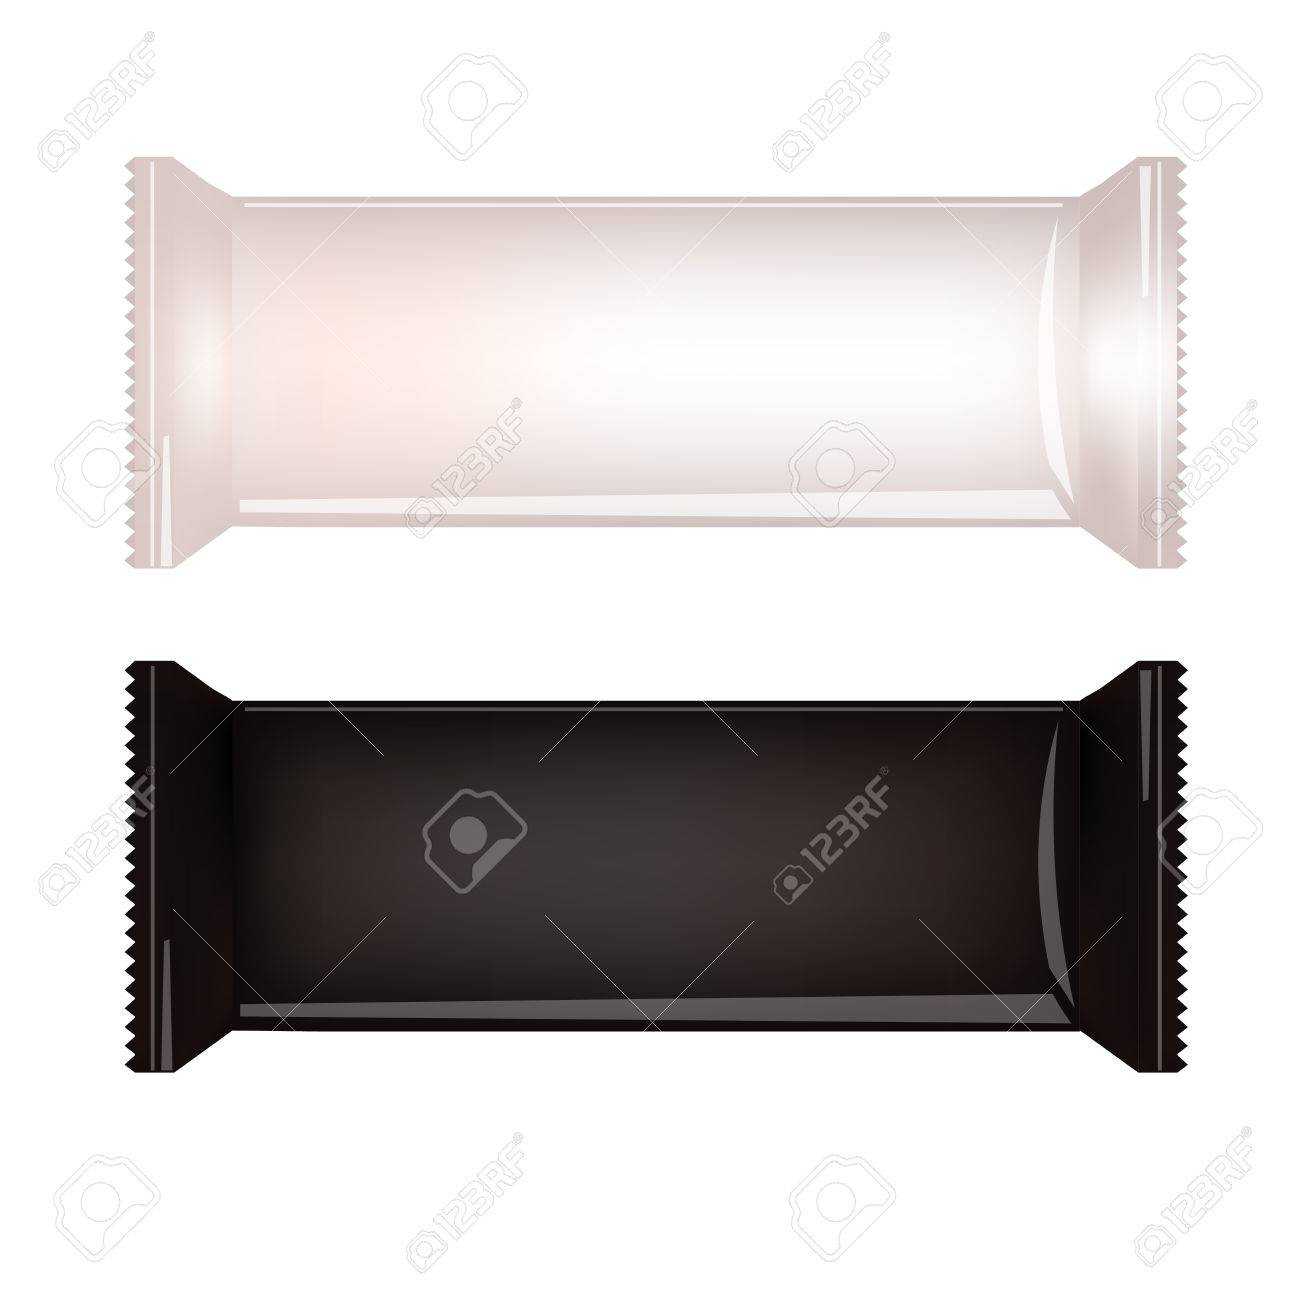 White And Black Blank Food Packaging For Biscuit, Wafer, Crackers,.. In Blank Candy Bar Wrapper Template